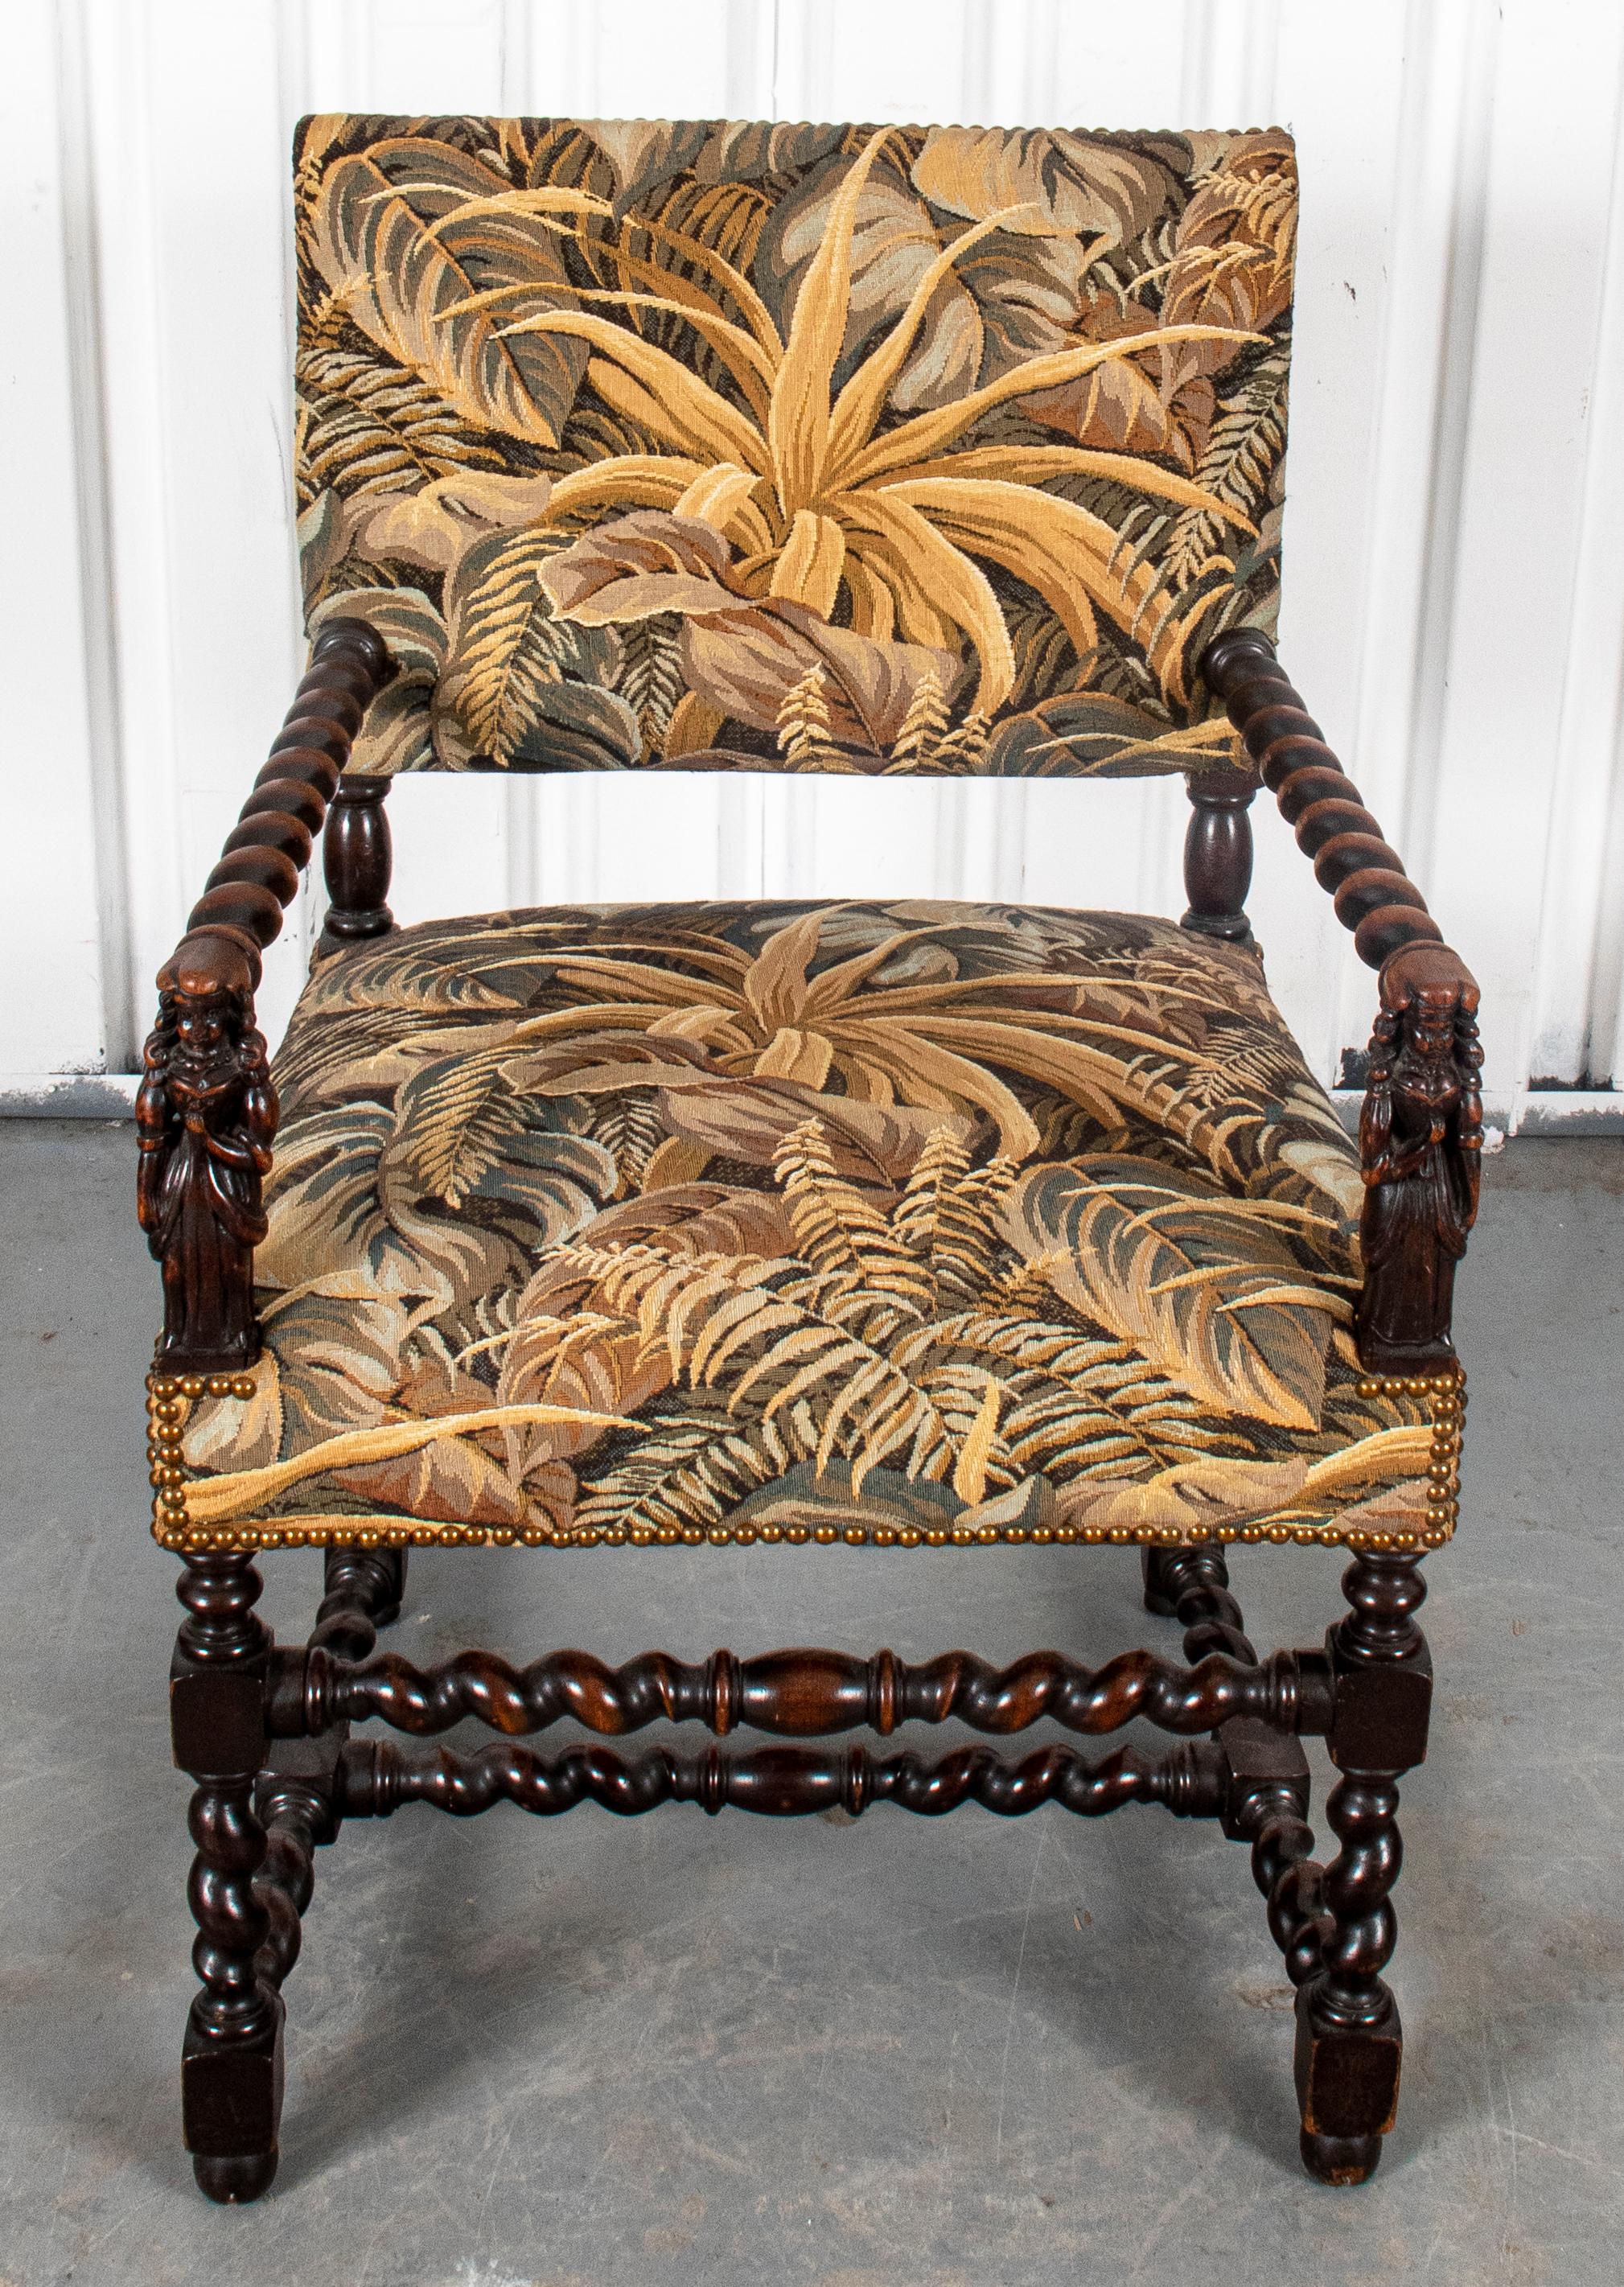 Jacobean Revival open frame armchair with carved figural arm rests, barley twist legs, and tapestry upholstered seat and back. 36